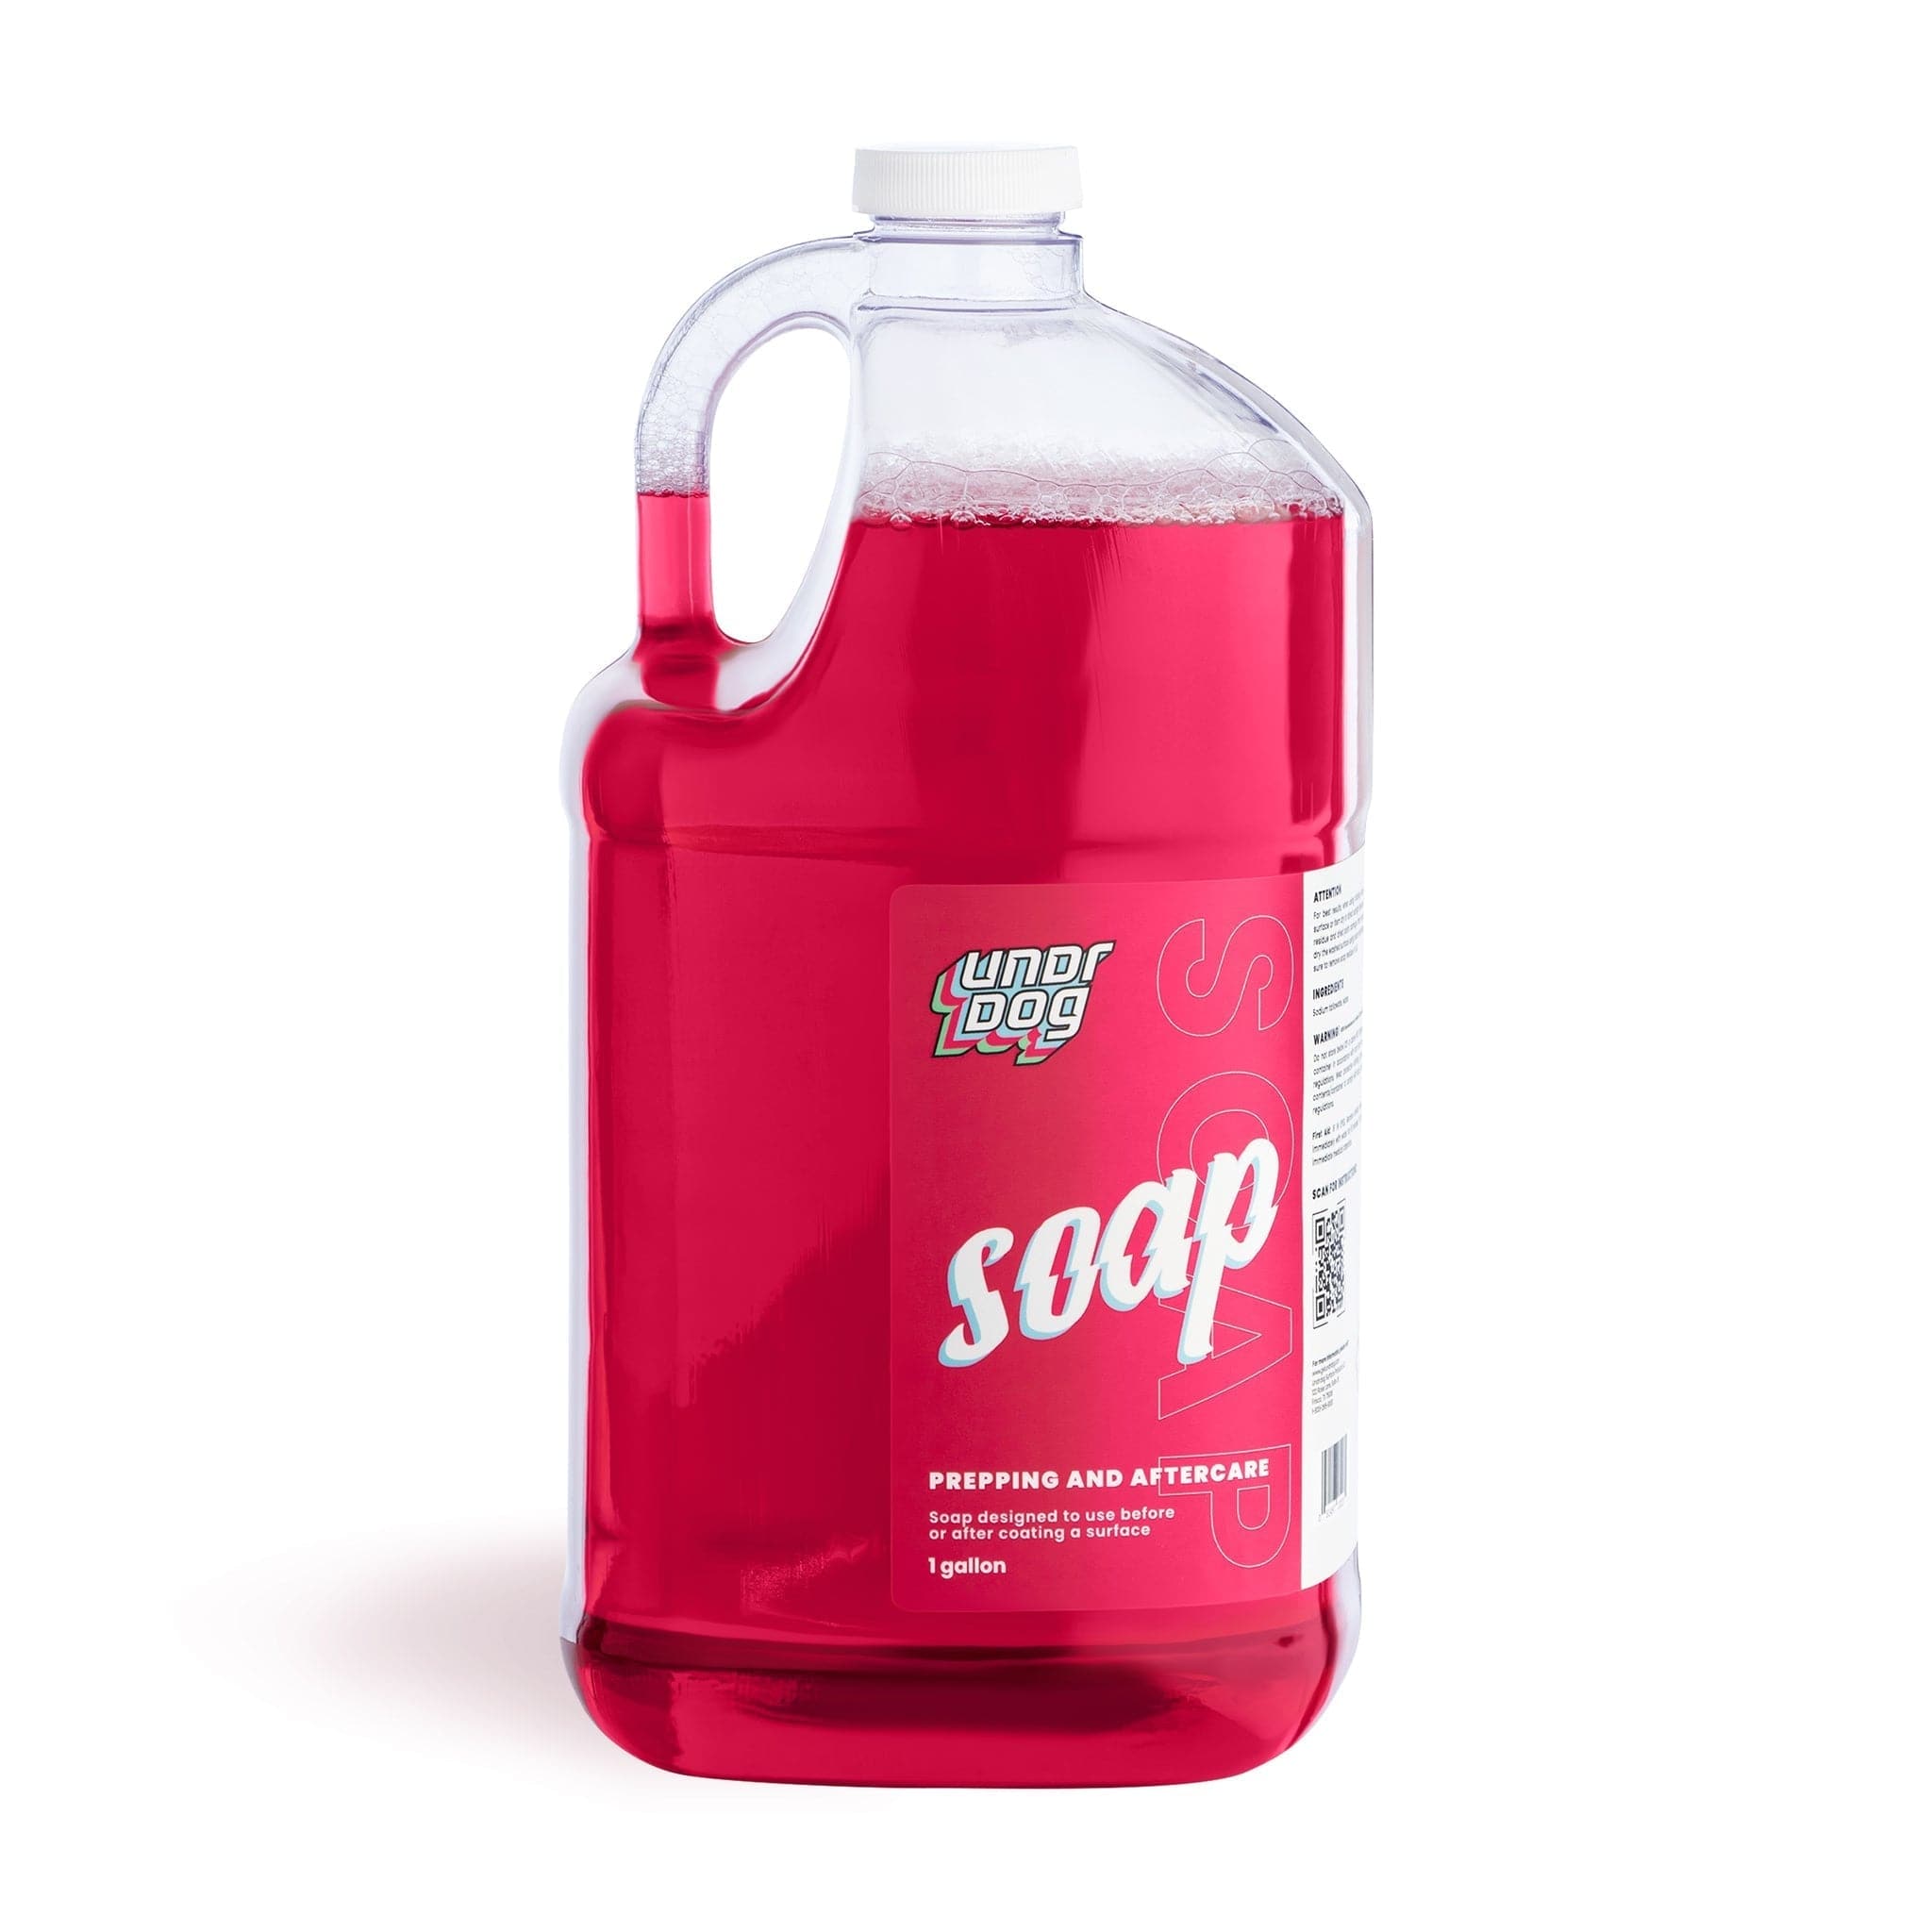 Soap_1_Gallon_4e7c6663-d074-4d7a-97c8-b4b50c3e9ec4.jpg - ColorPop Car Soap: Vibrant Cleaning for Every Hue! - Undrdog Surface Products